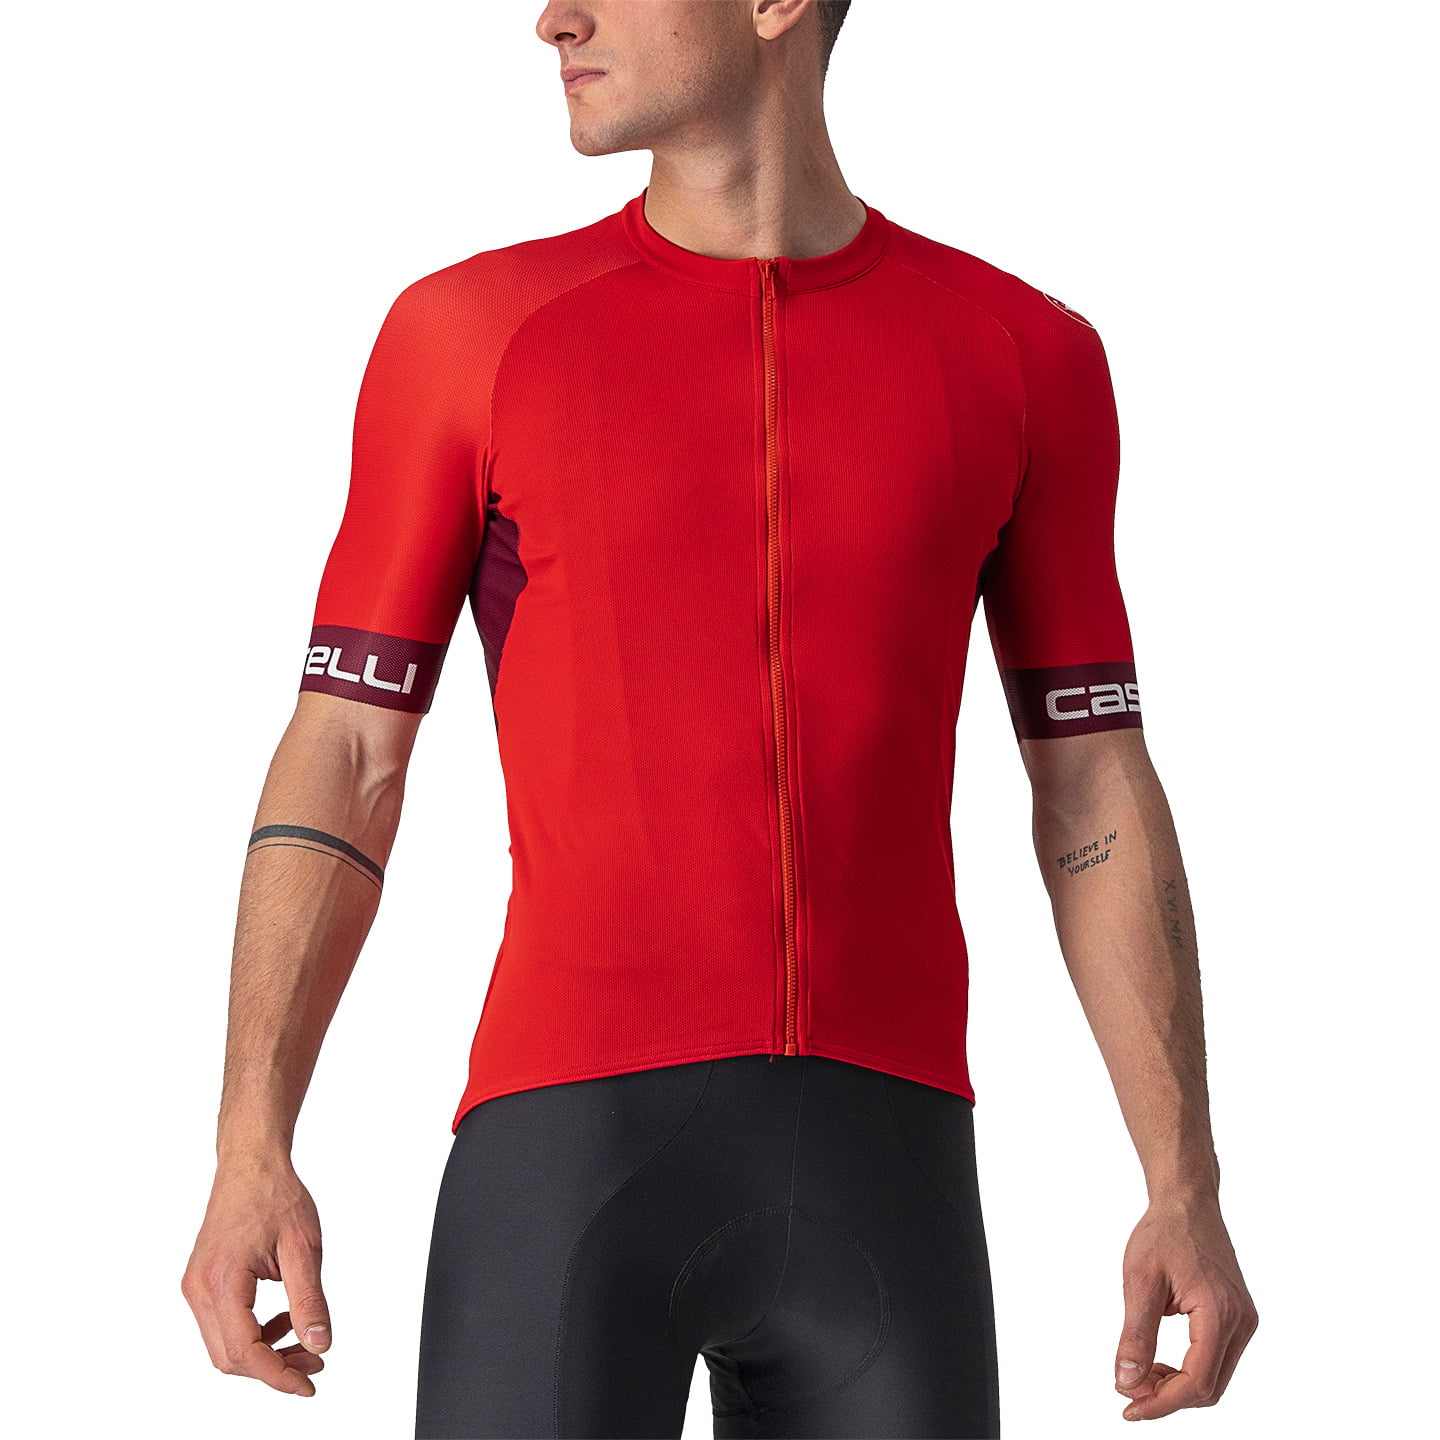 Entrata VI Short Sleeve Jersey Short Sleeve Jersey, for men, size S, Cycling jersey, Cycling clothing